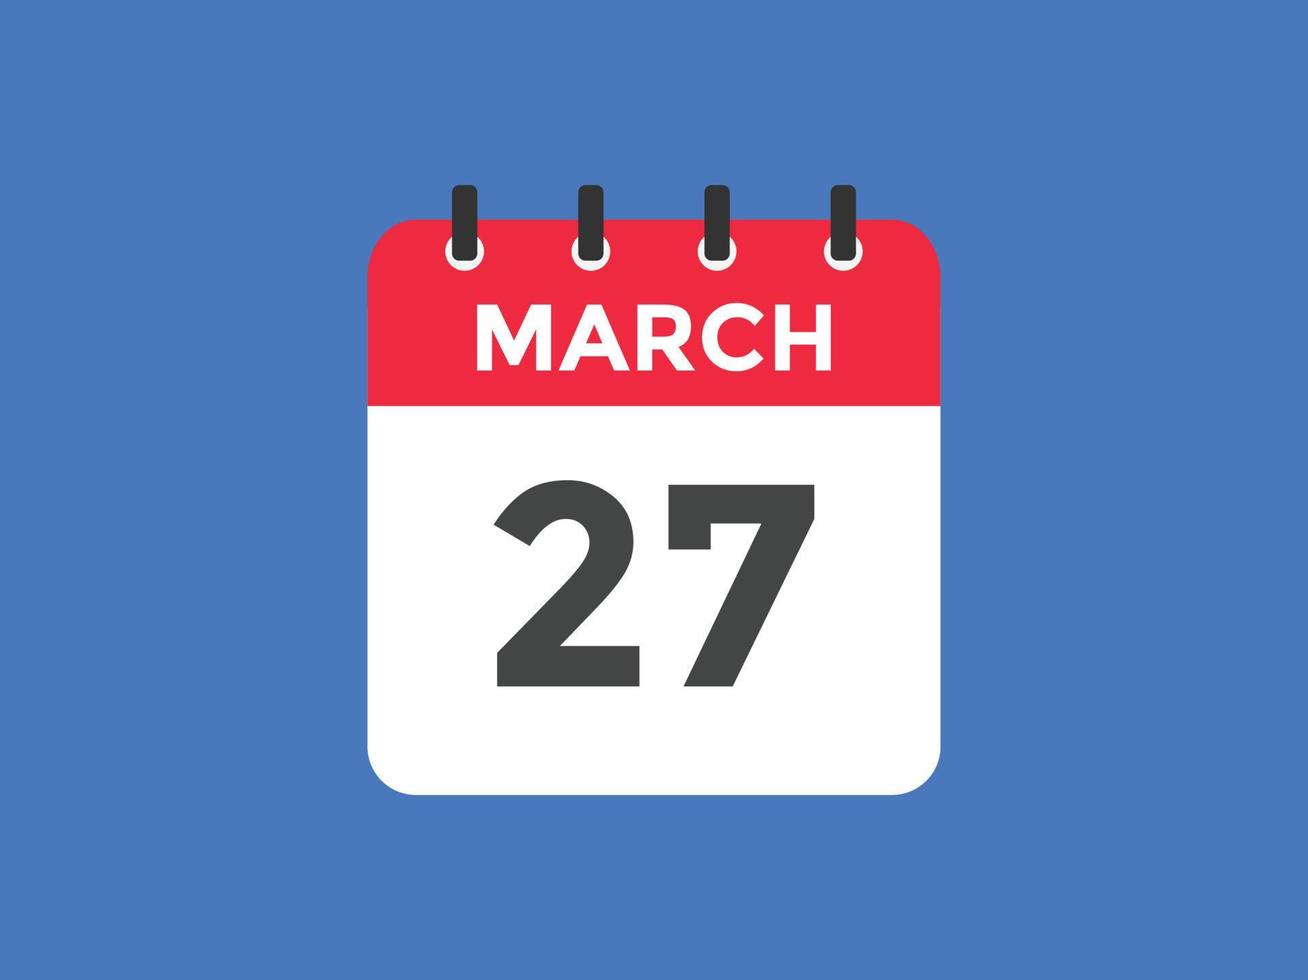 march 27 calendar reminder. 27th march daily calendar icon template. Calendar 27th march icon Design template. Vector illustration